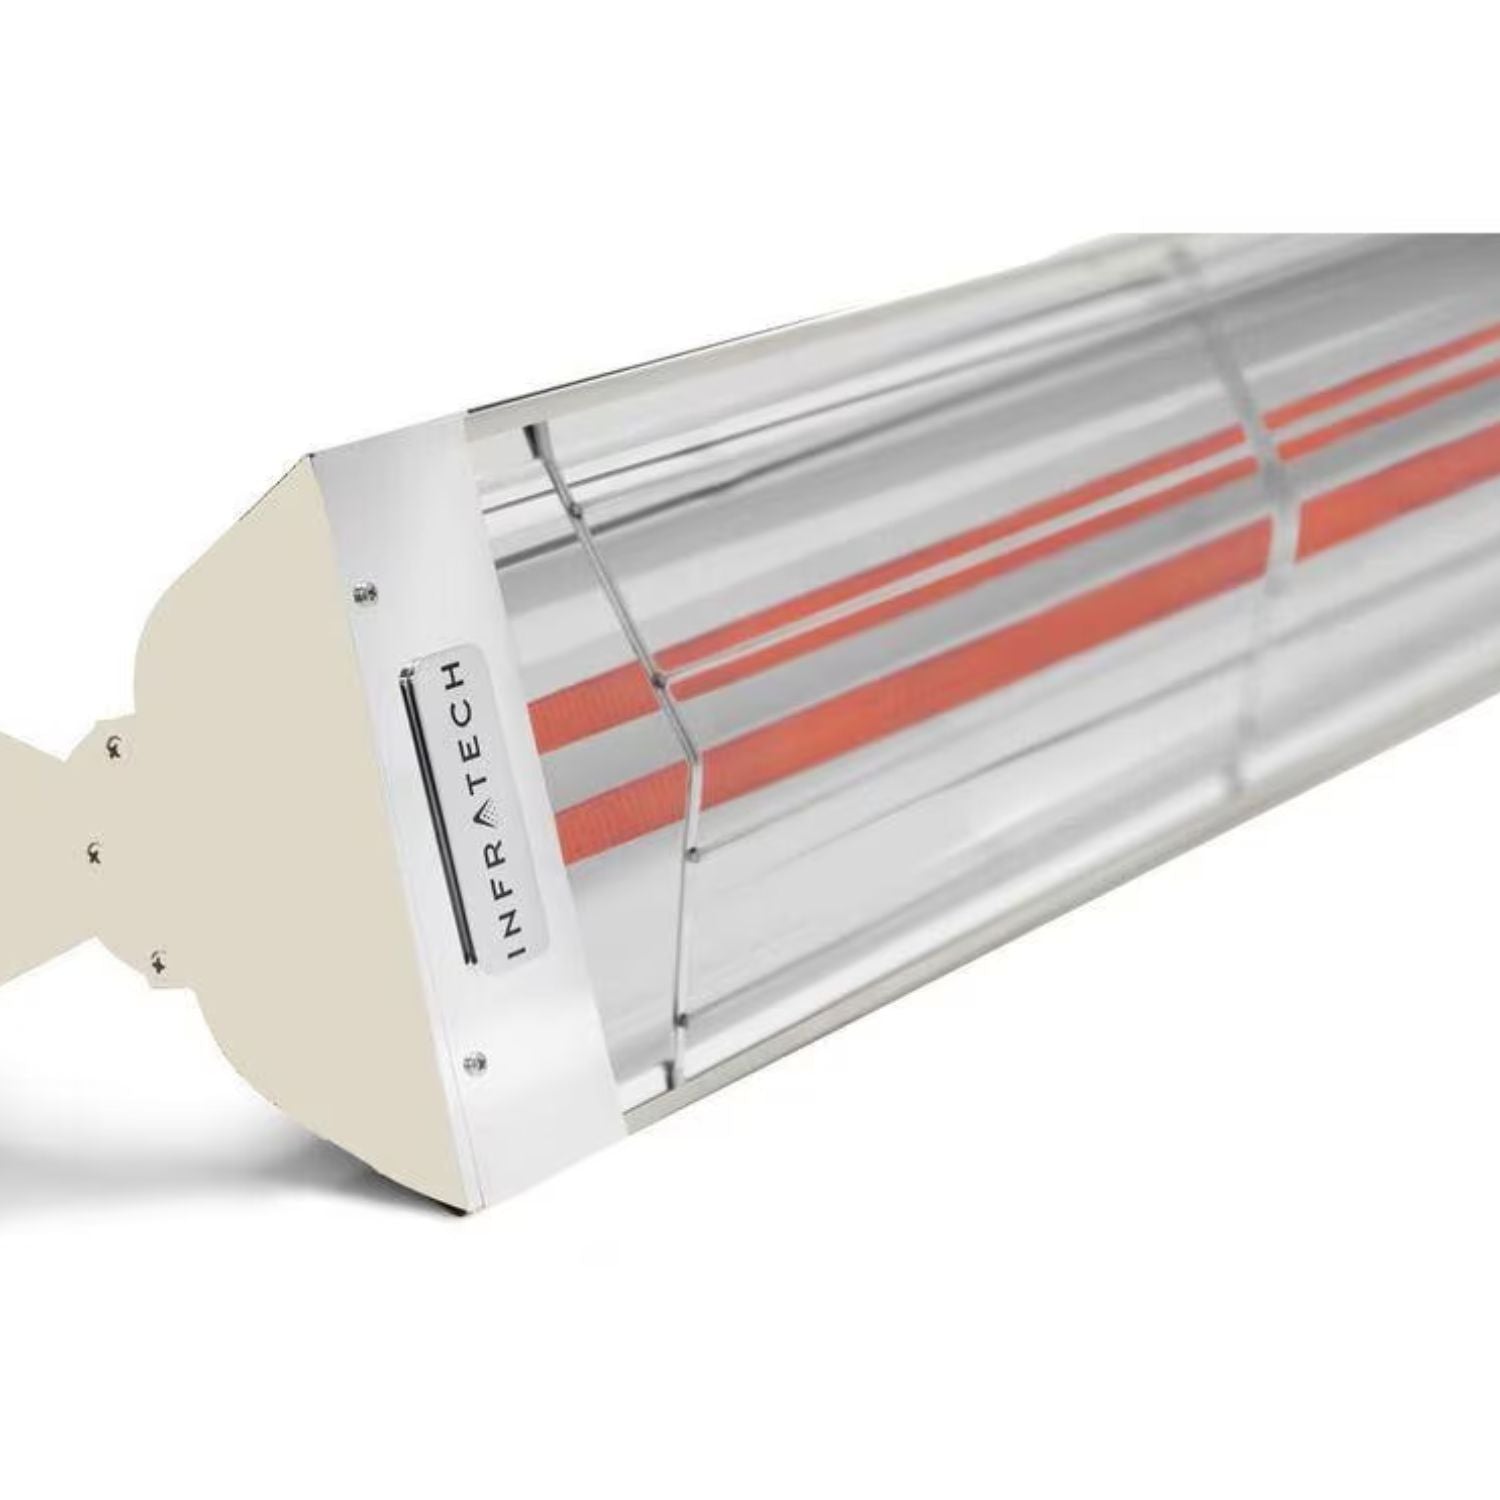 Infratech WD-Series 61 1/4 inch Dual Element Infrared Electric Patio Heater-Almond-240 Volt Patio Heaters 12028673